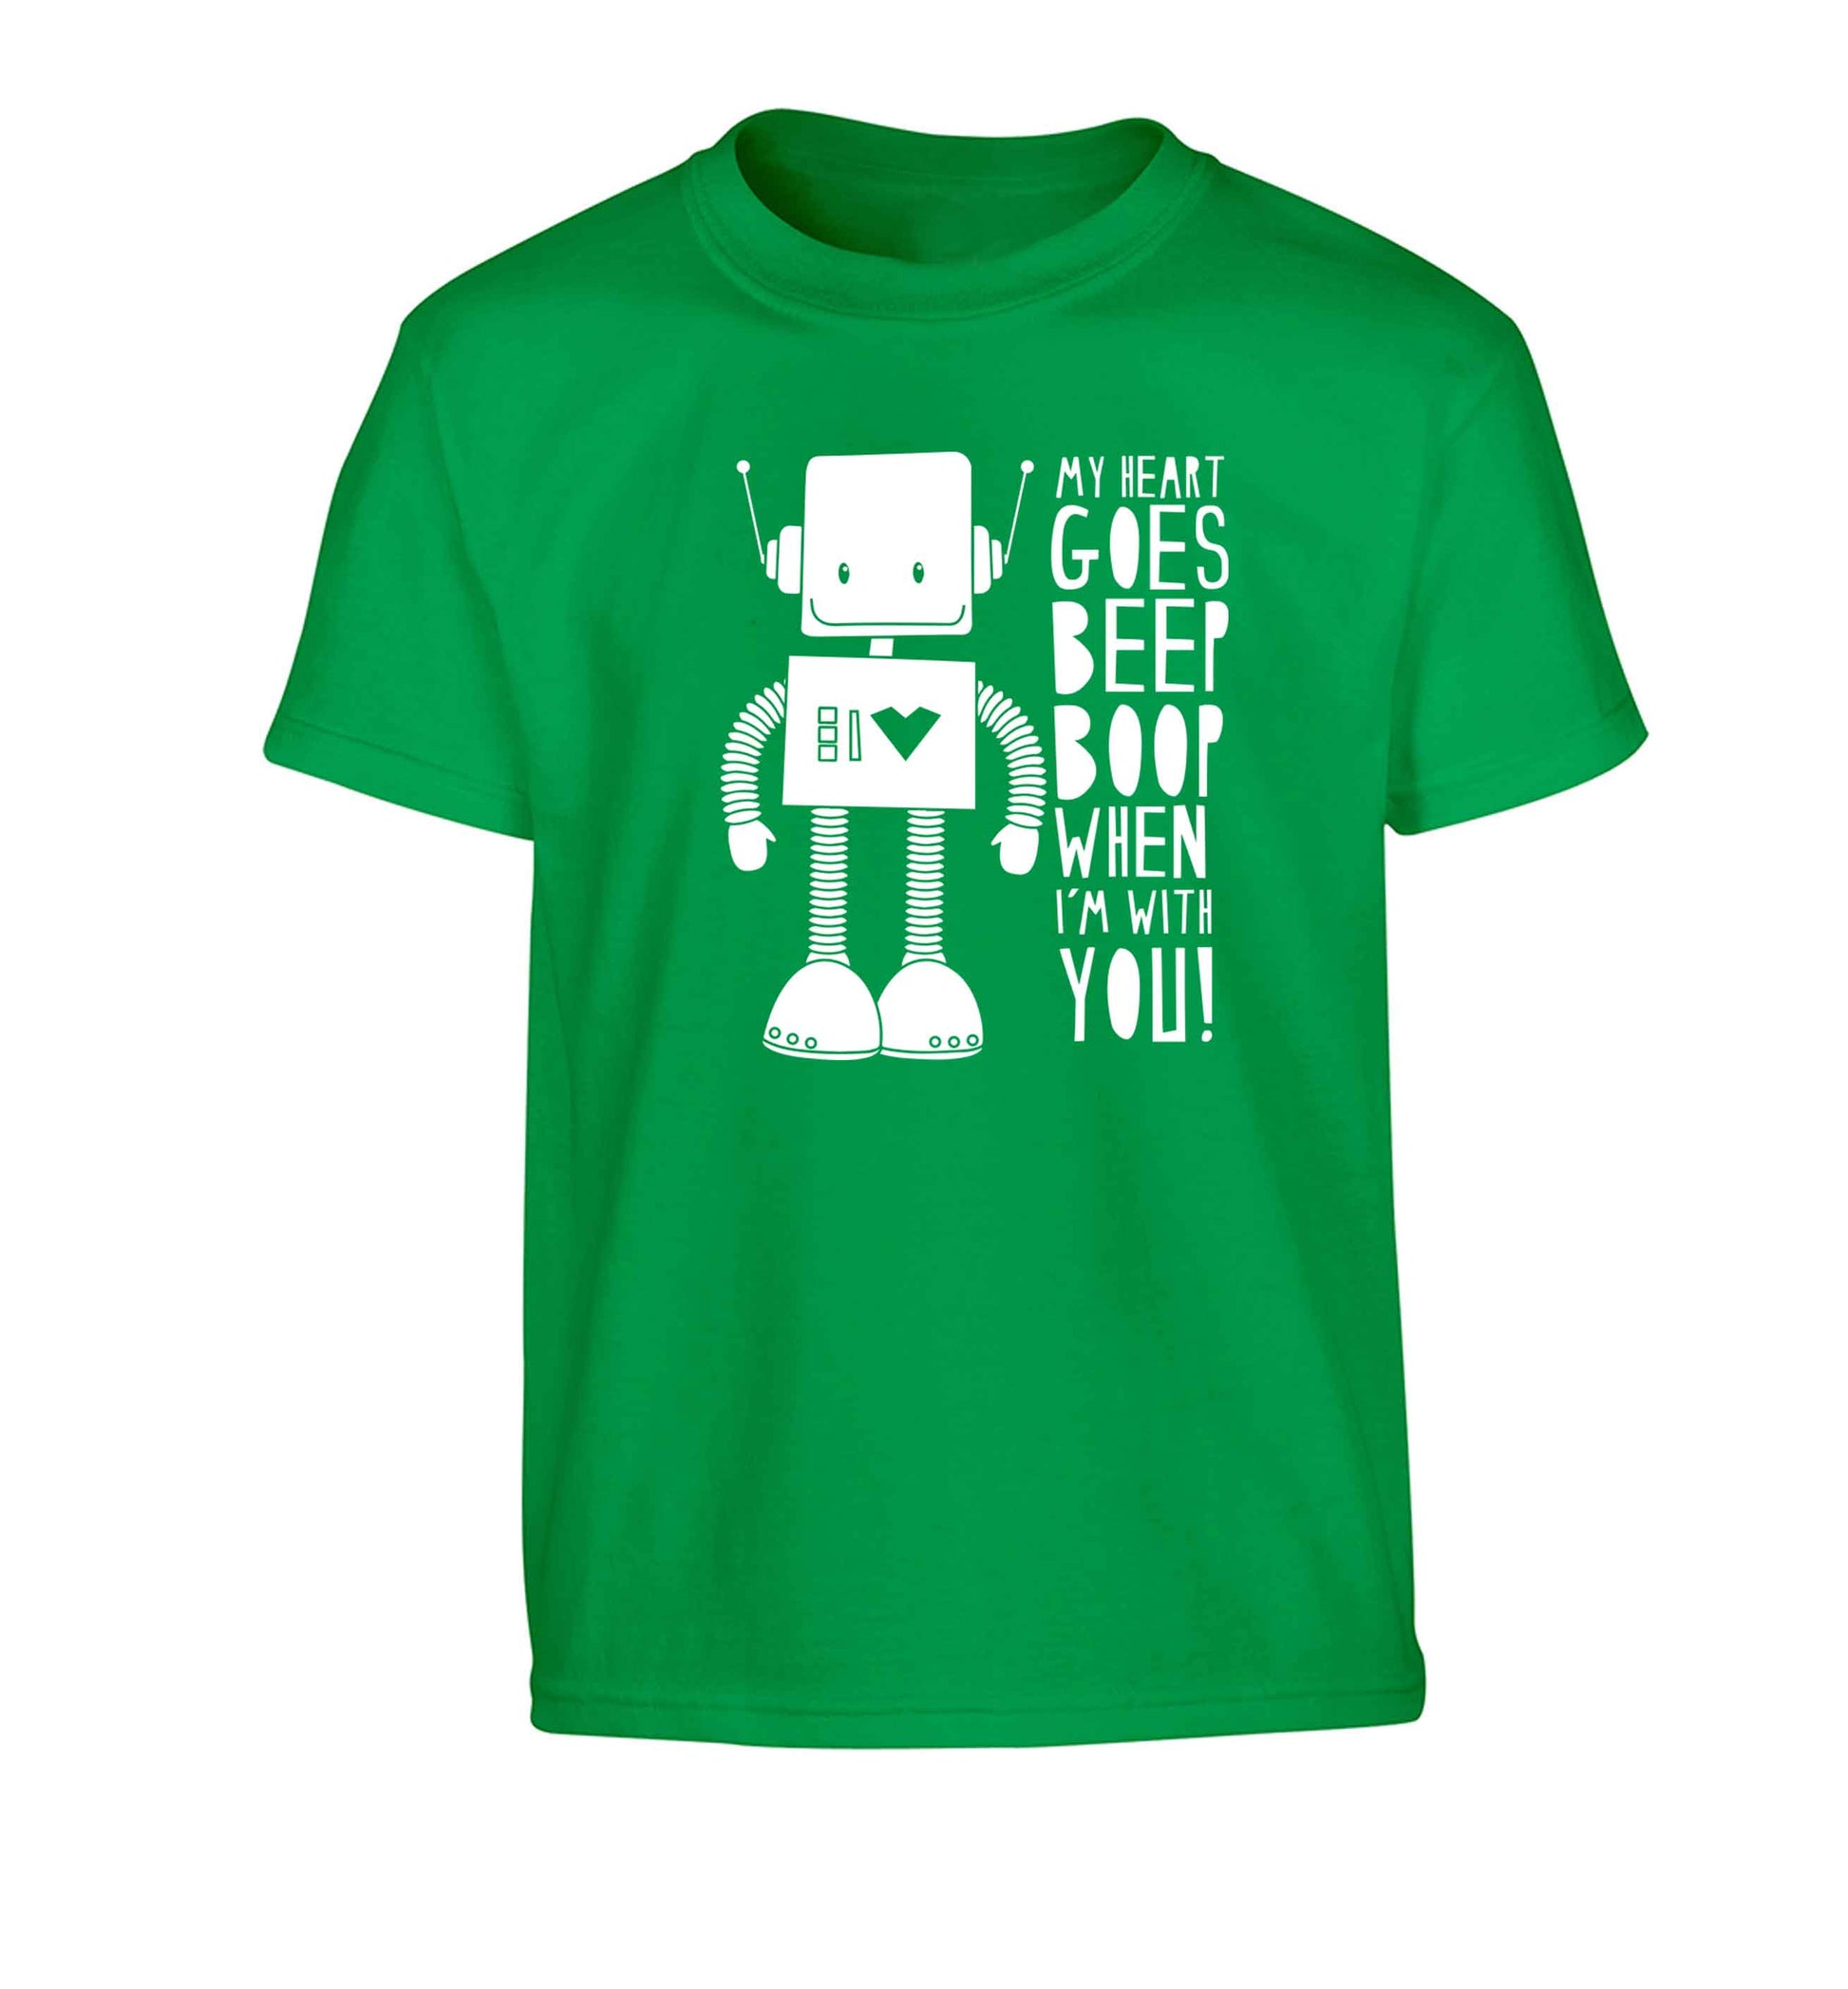 My heart goes beep boop when I'm with you Children's green Tshirt 12-13 Years